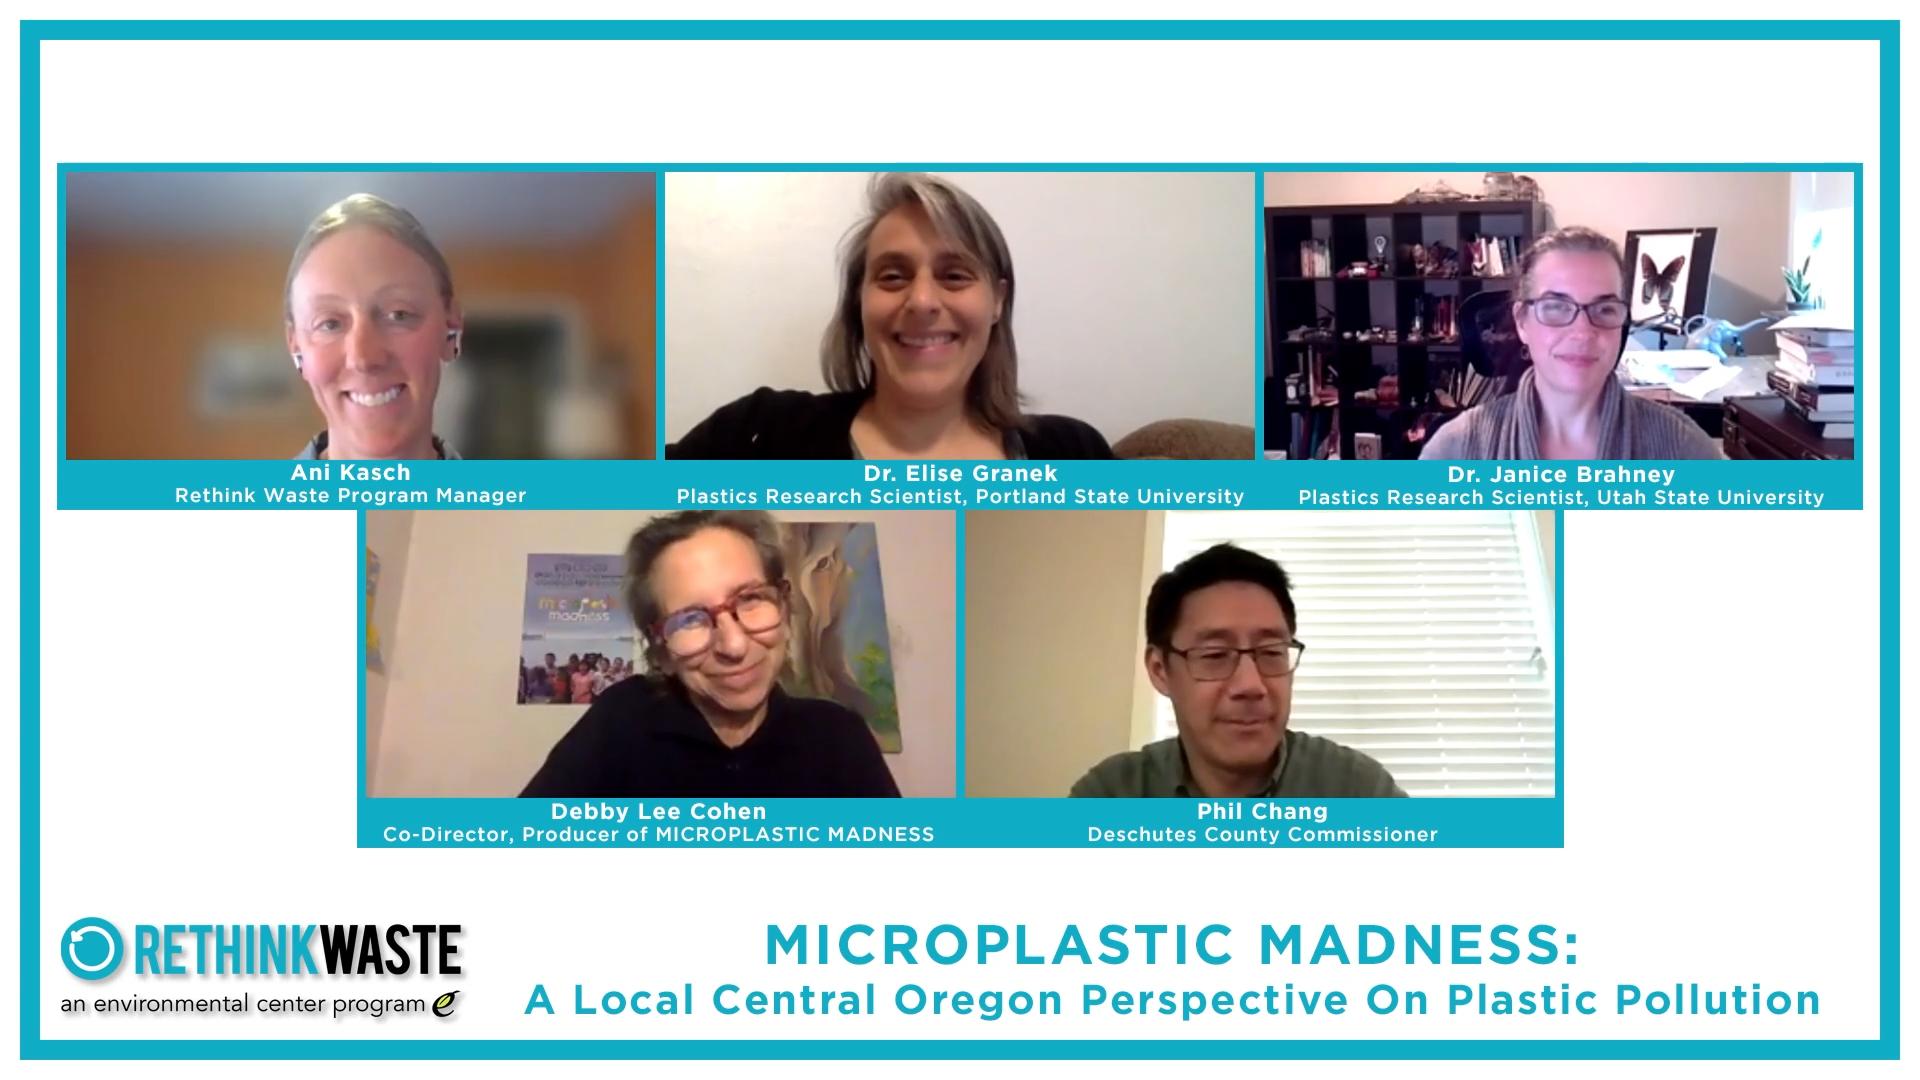 MICROPLASTIC MADNESS Panel Discussion